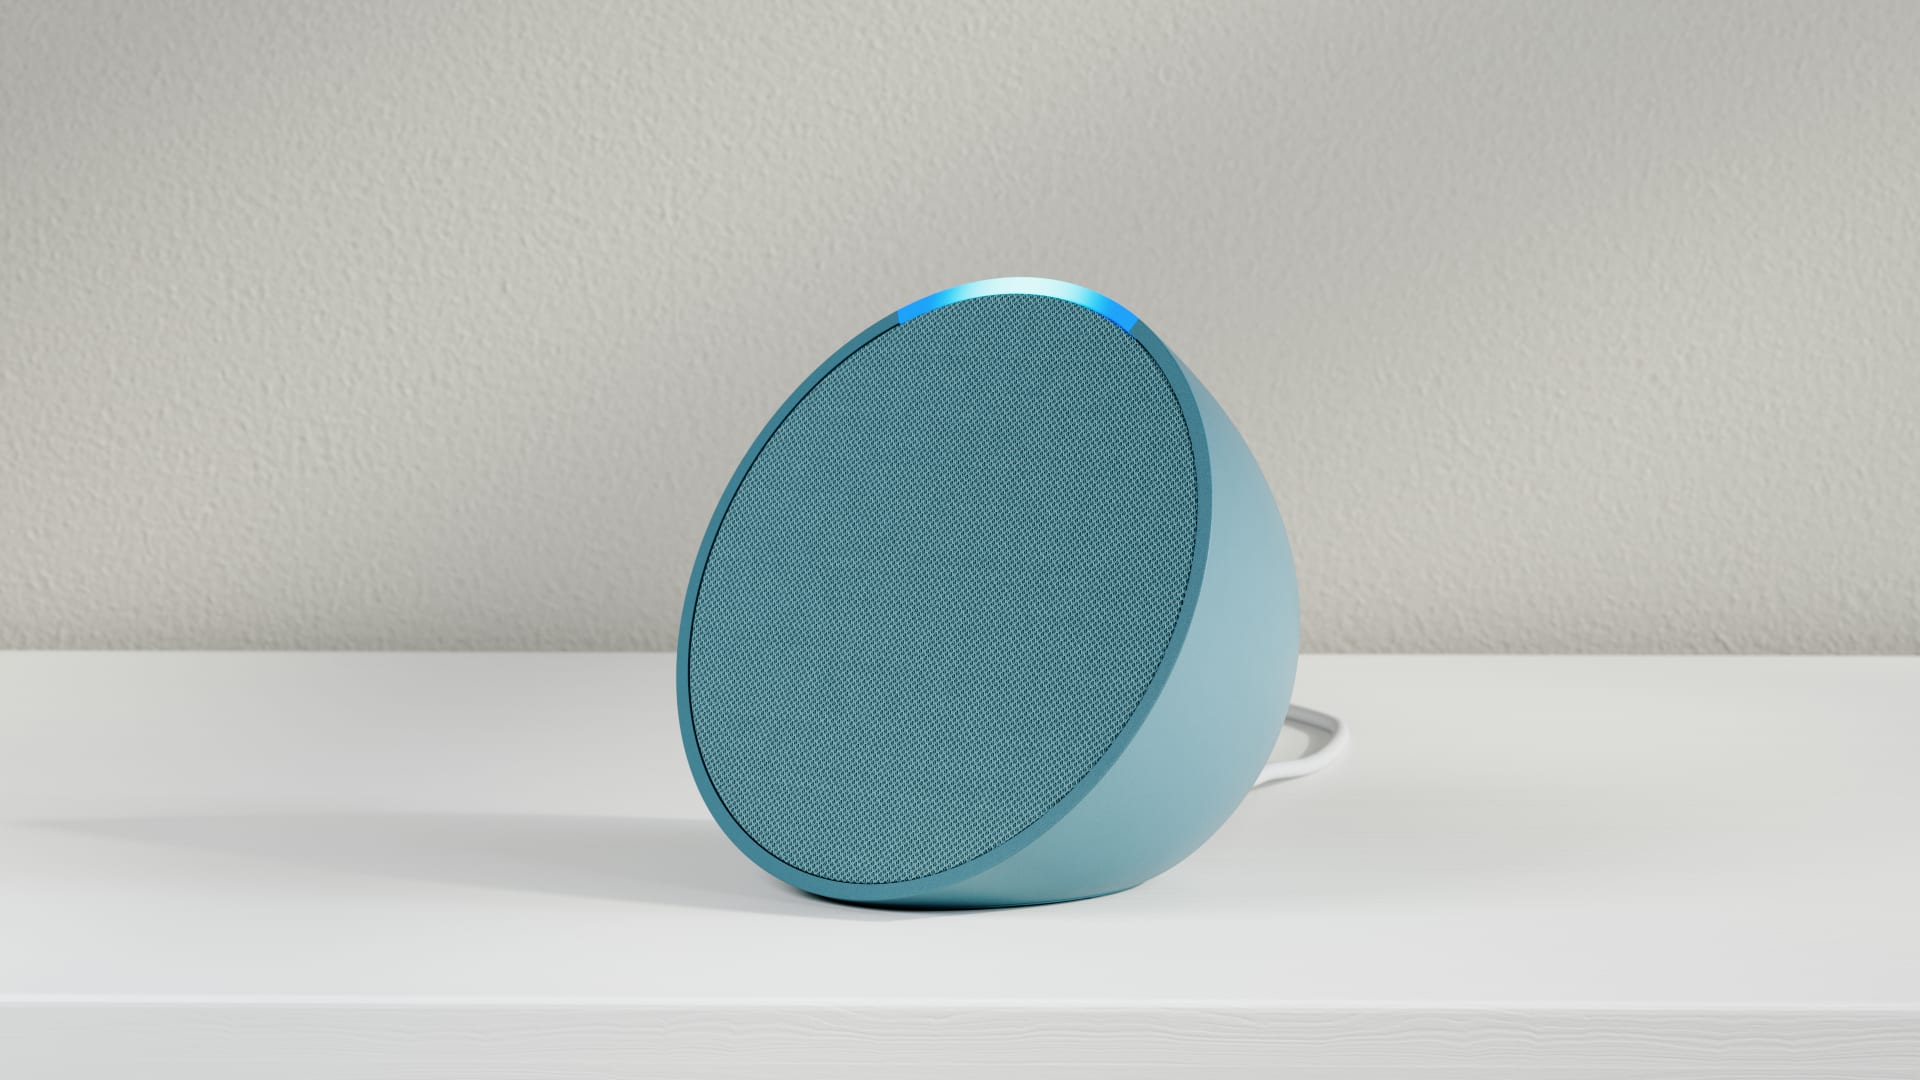 Amazon announces new Echo with funky design and revamped earbuds